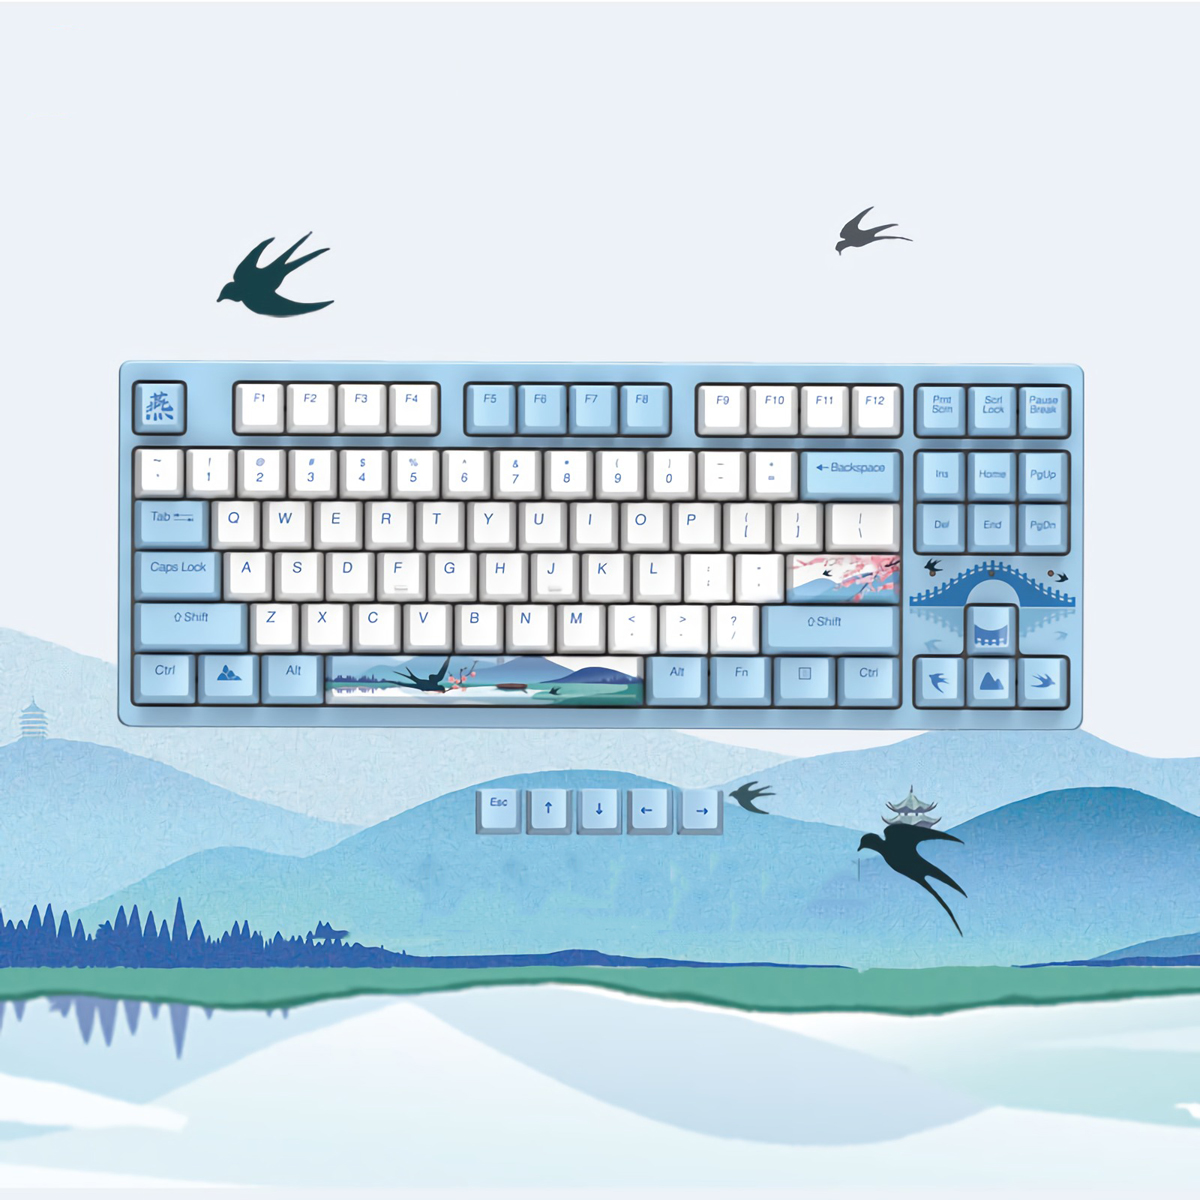 Find DAREU A87 Mechanical Keyboard Swallow Theme Wired Ice Blue Backlight 87 Keys Cherry MX Switch Blue PBT Keycaps Gaming Keyboard for Sale on Gipsybee.com with cryptocurrencies